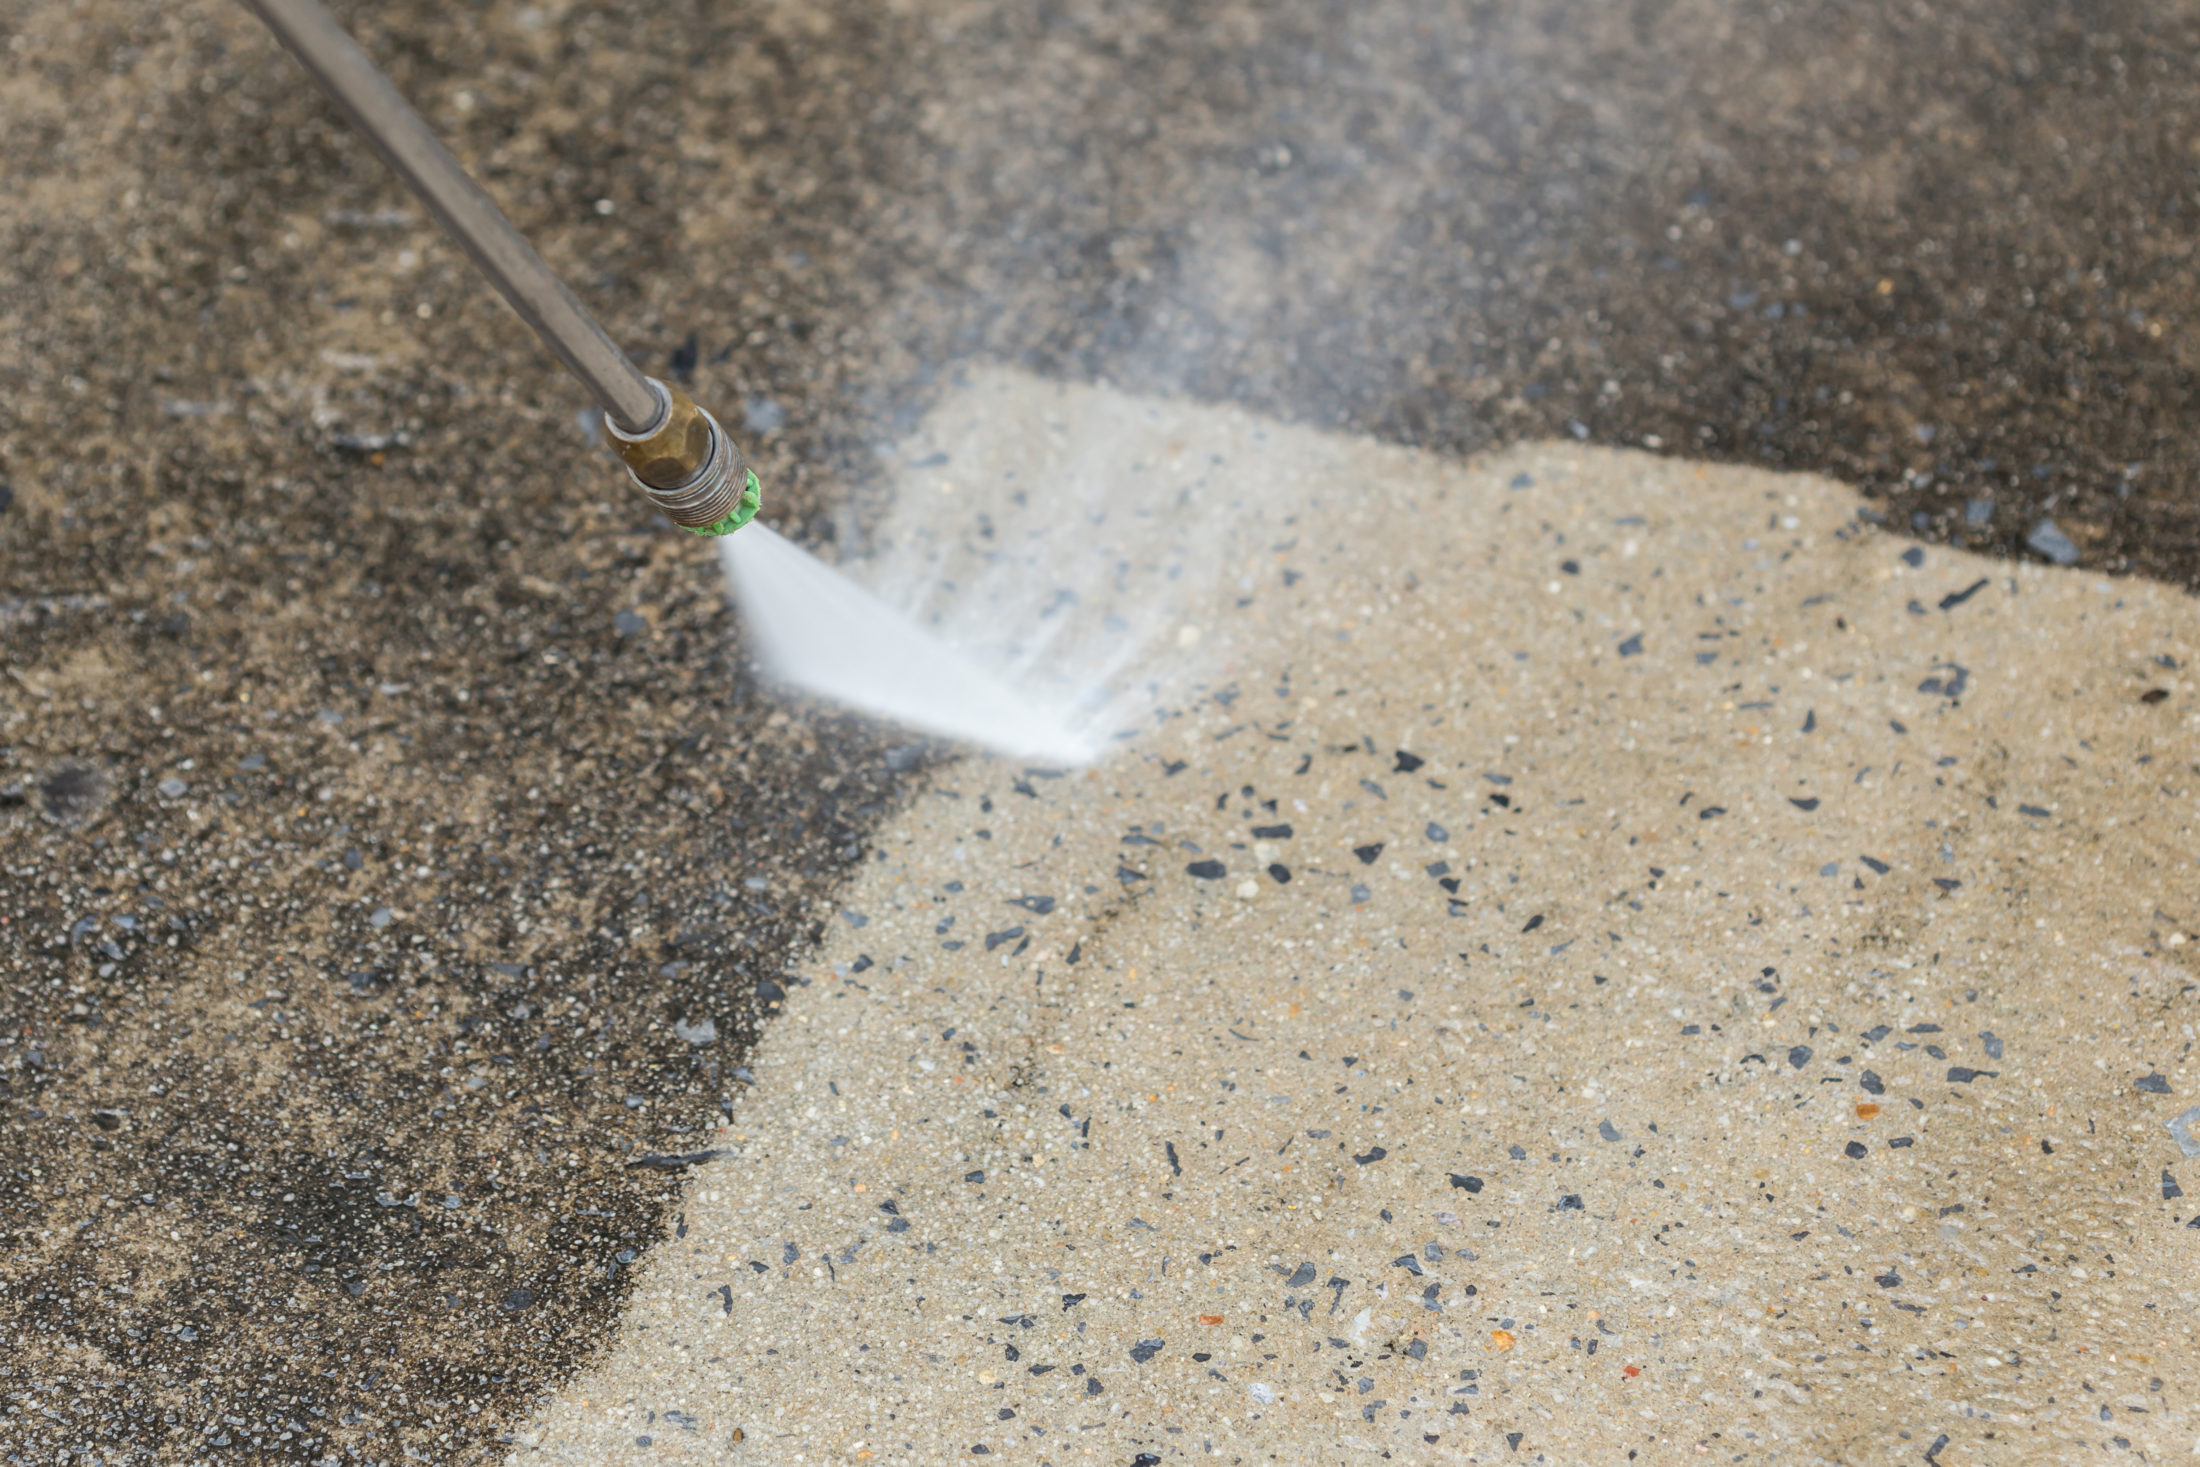 High Pressure Cleaning | All Clean Facility Services